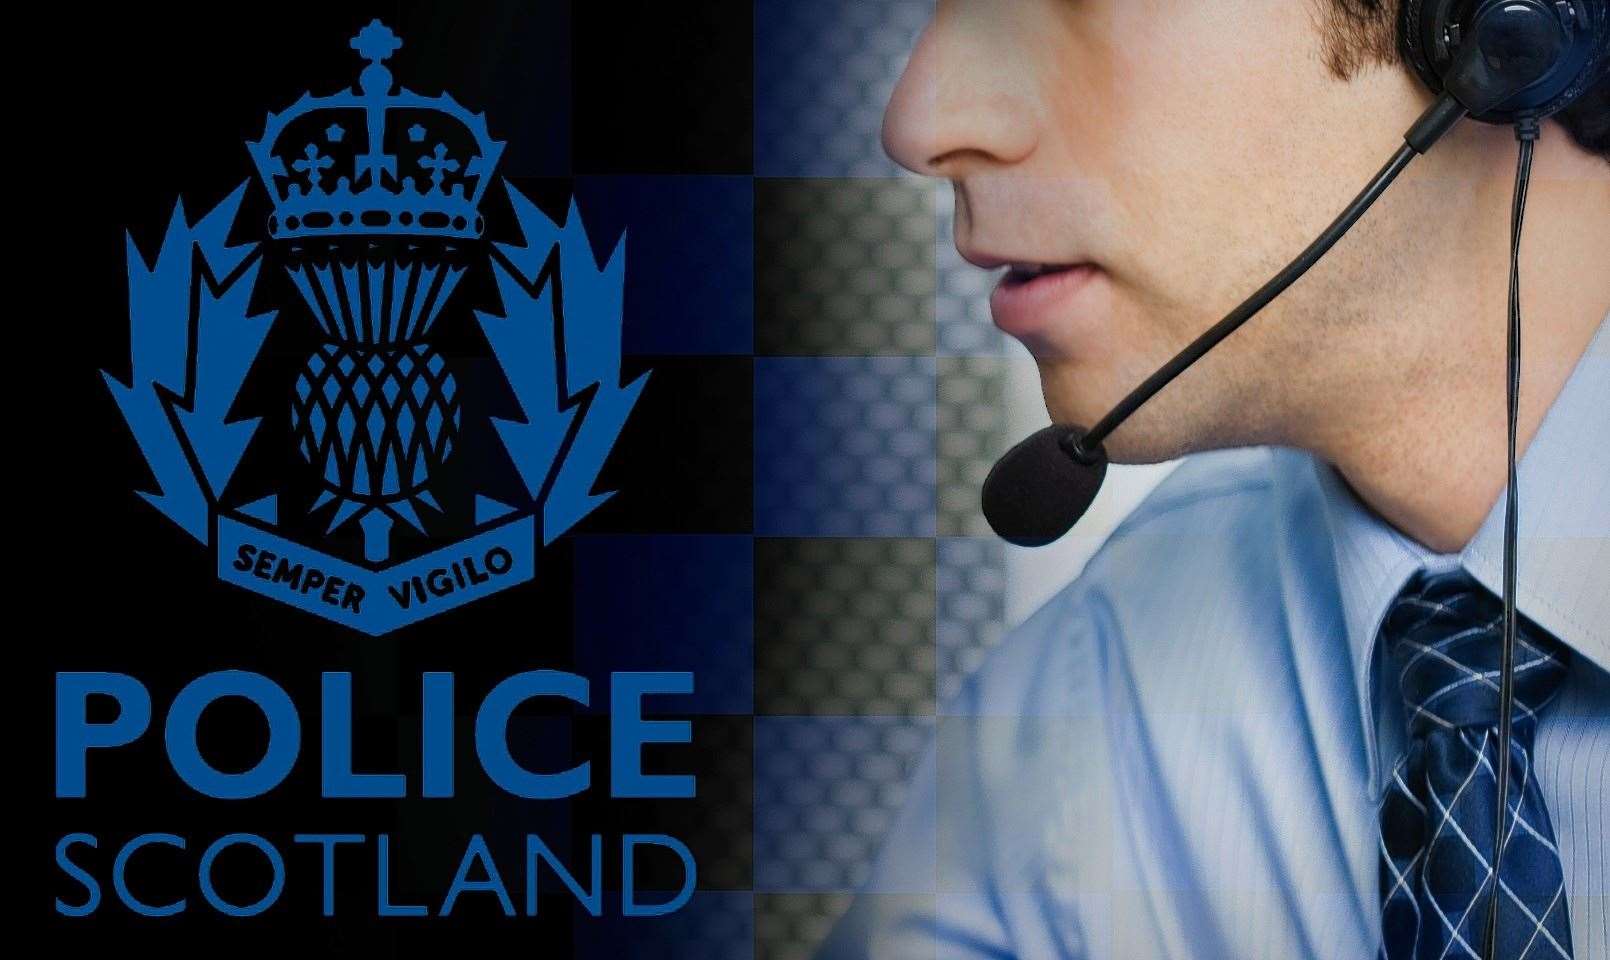 Police Scotland appeal for information after woman was assaulted.